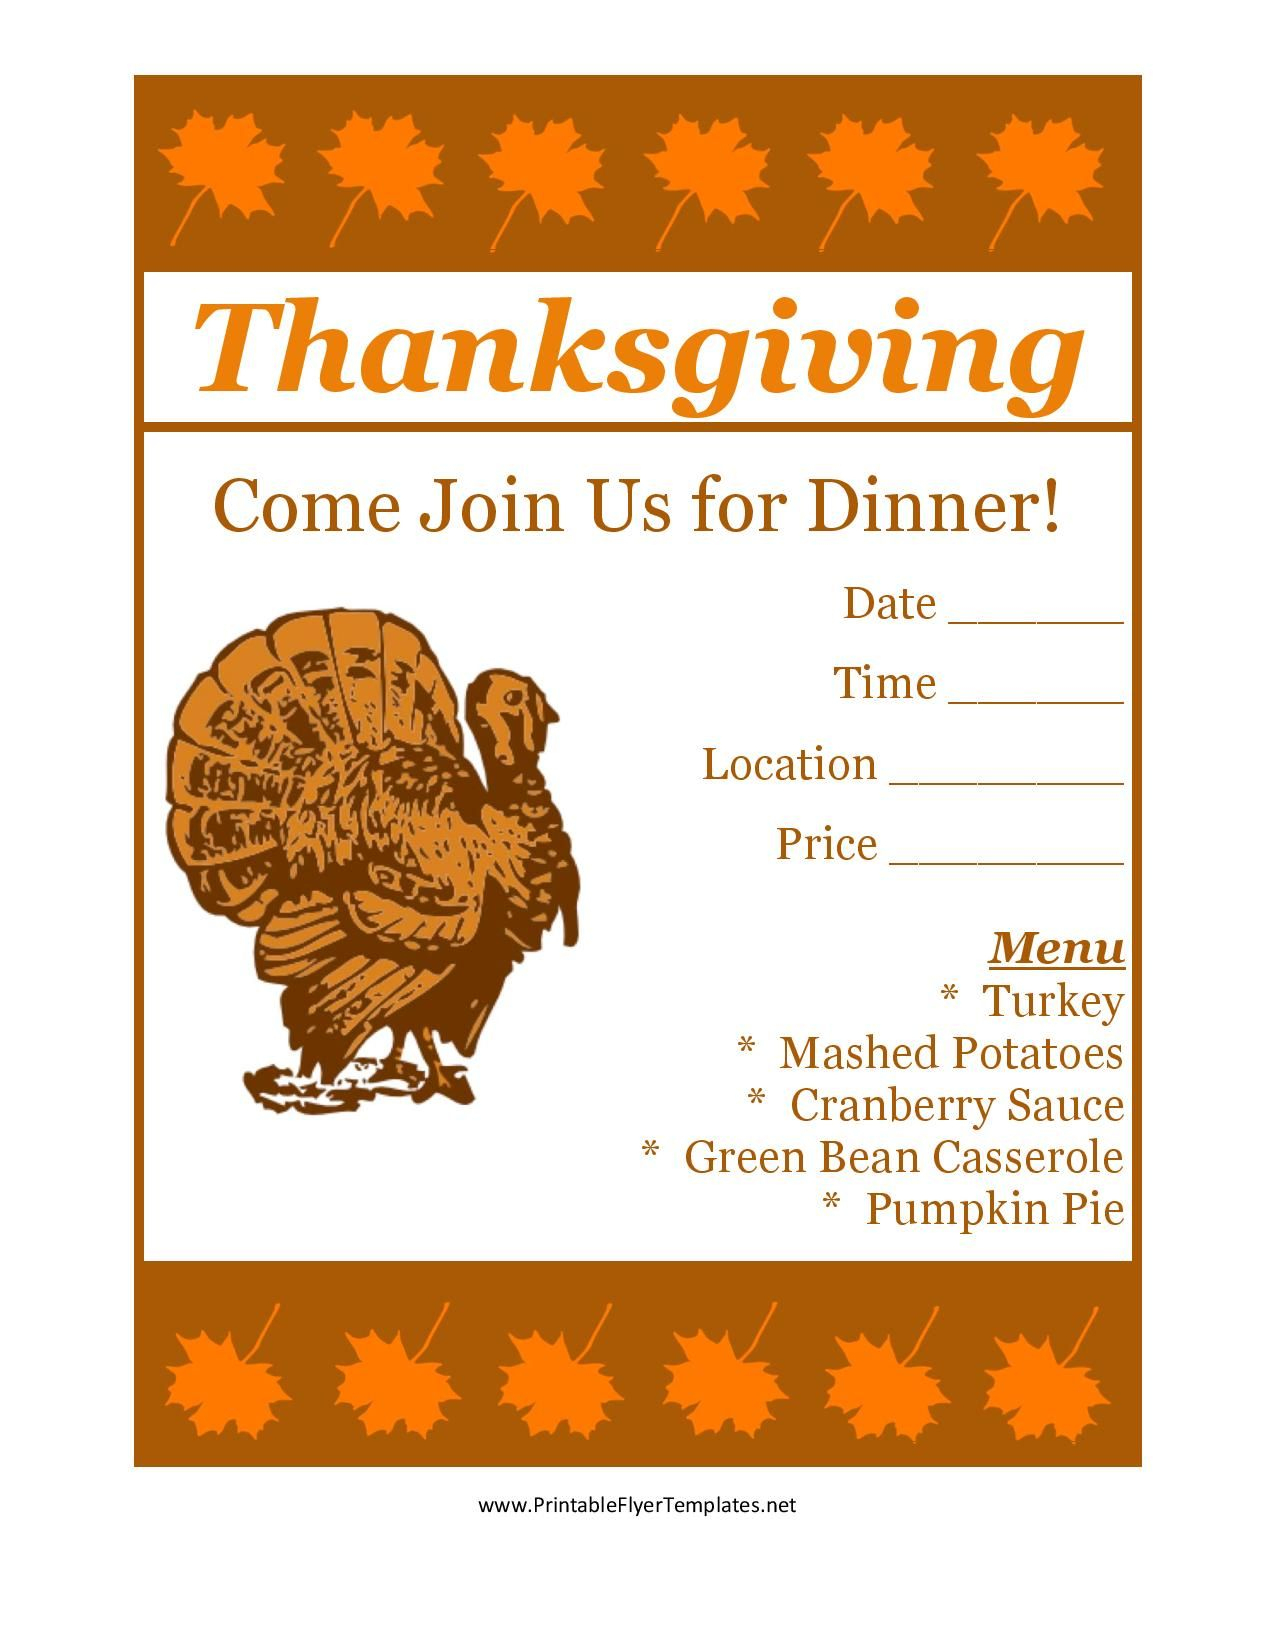 Free Printable Thanksgiving Flyer Invintation Template | Holiday&amp;#039;s - Free Printable Flyers For Church